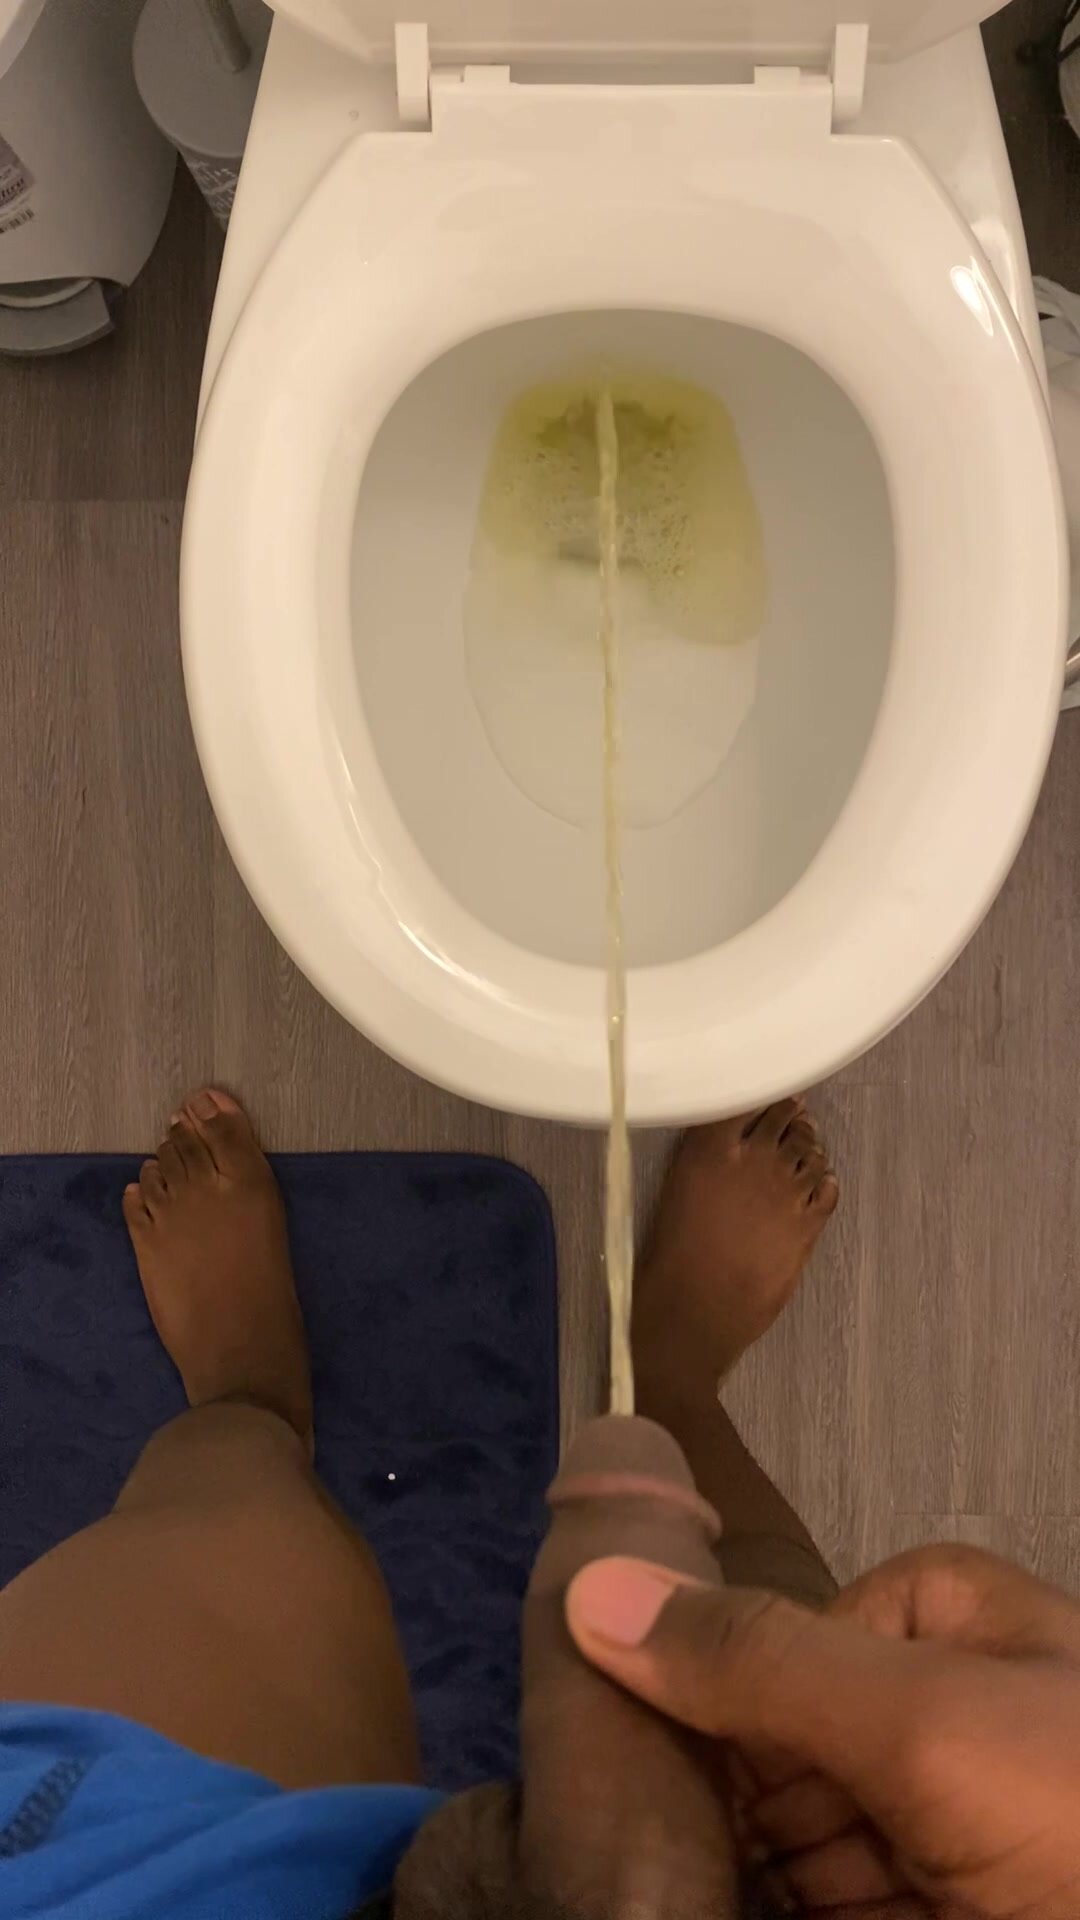 A small piss